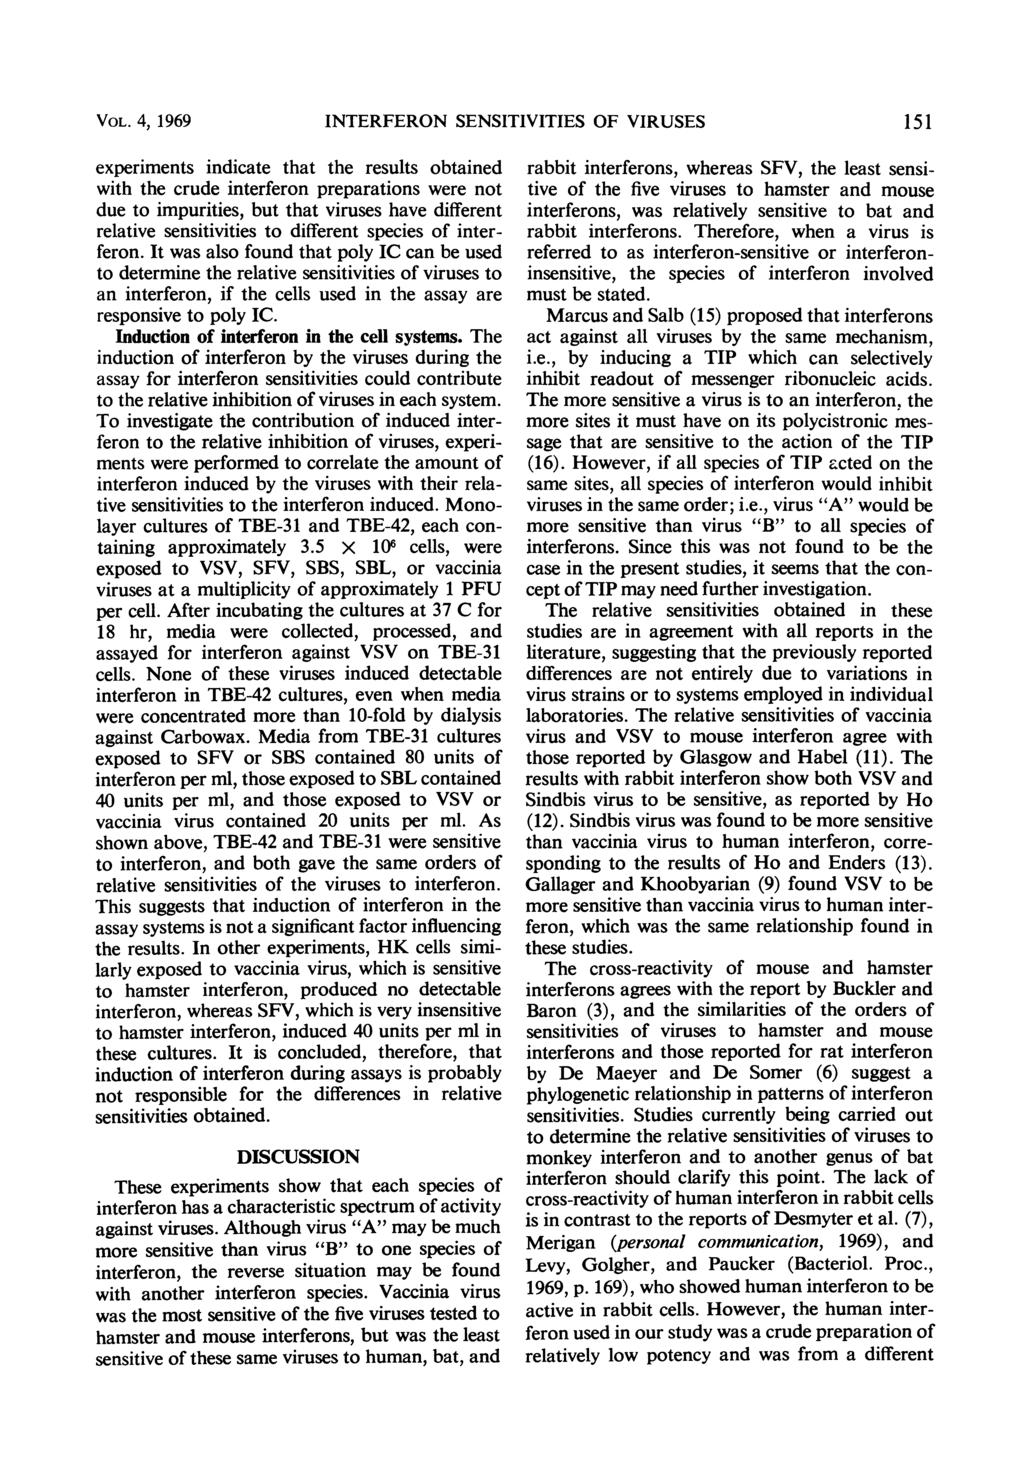 VOL. 4, 1969 INTERFERON SENSITIVITIES OF VIRUSES 151 experiments indicate that the results obtained with the crude interferon preparations were not due to impurities, but that viruses have different